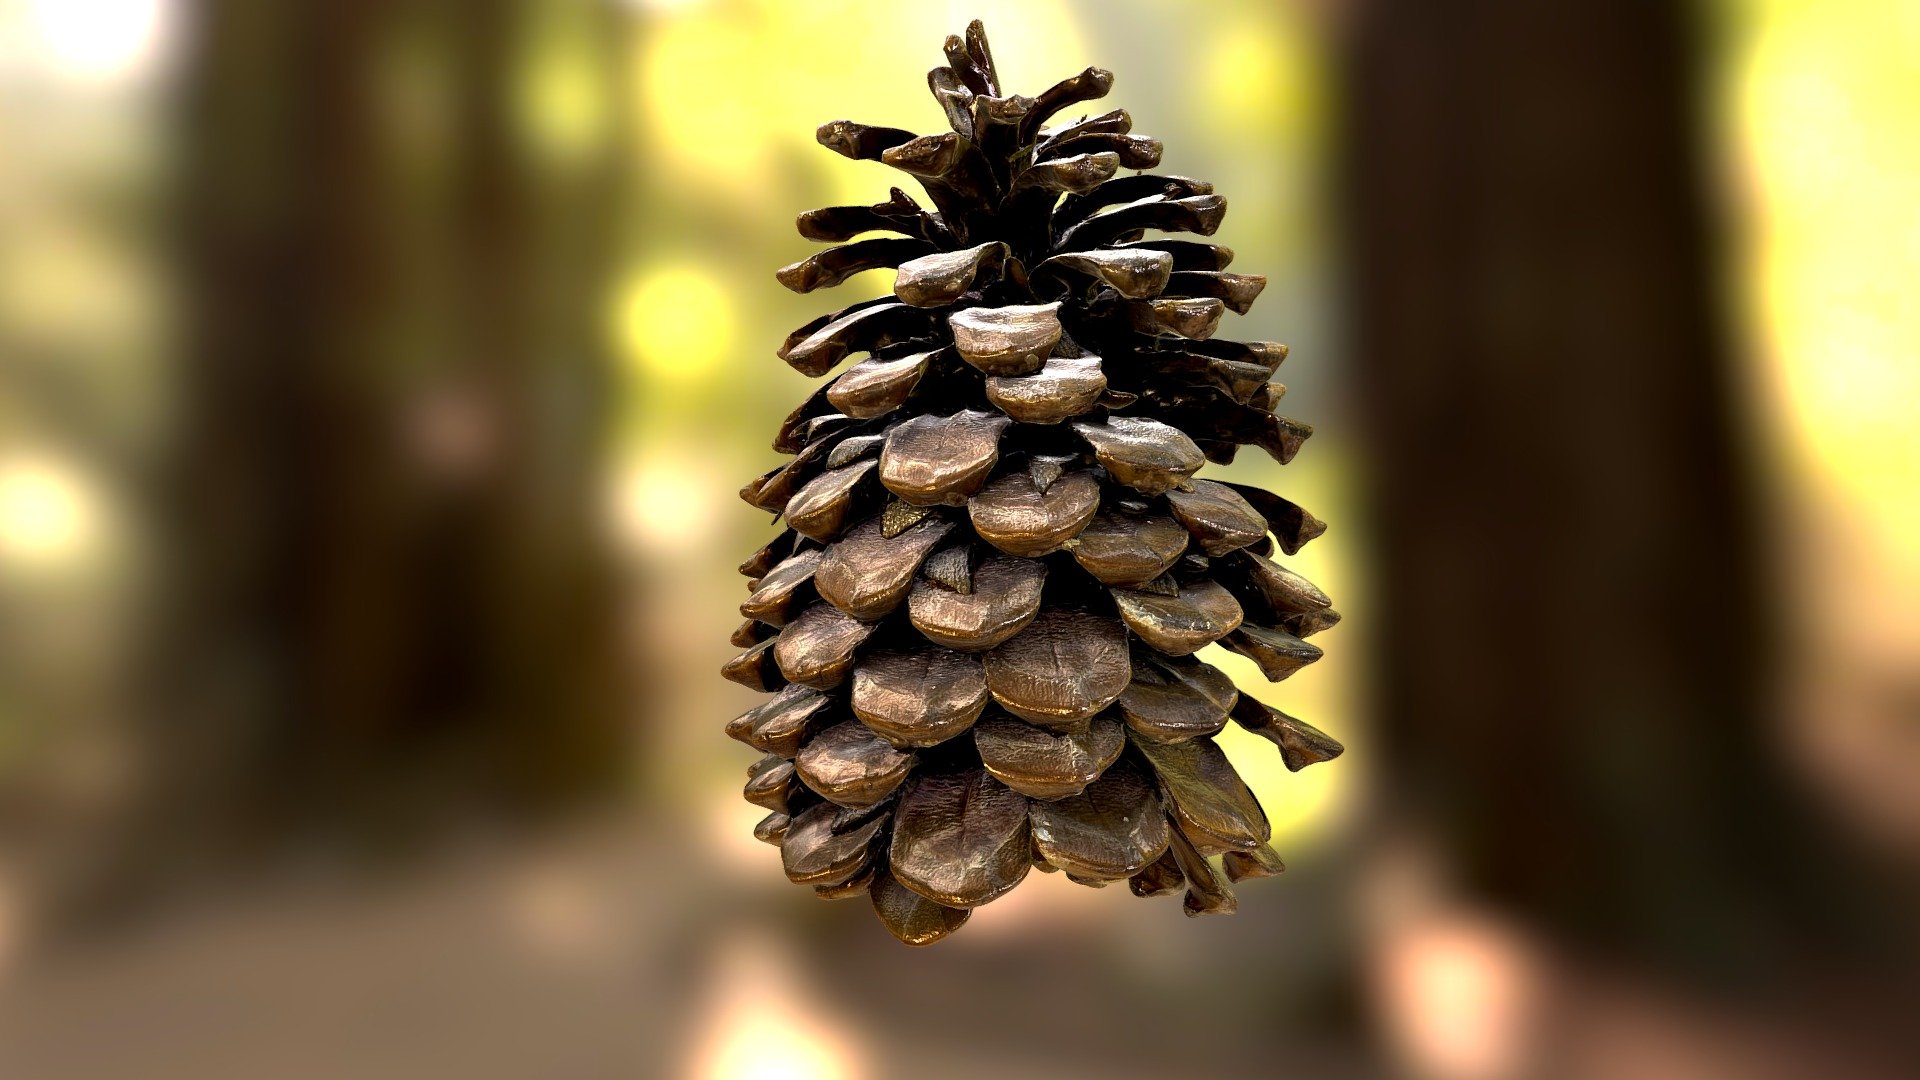 A large pinecone about 5